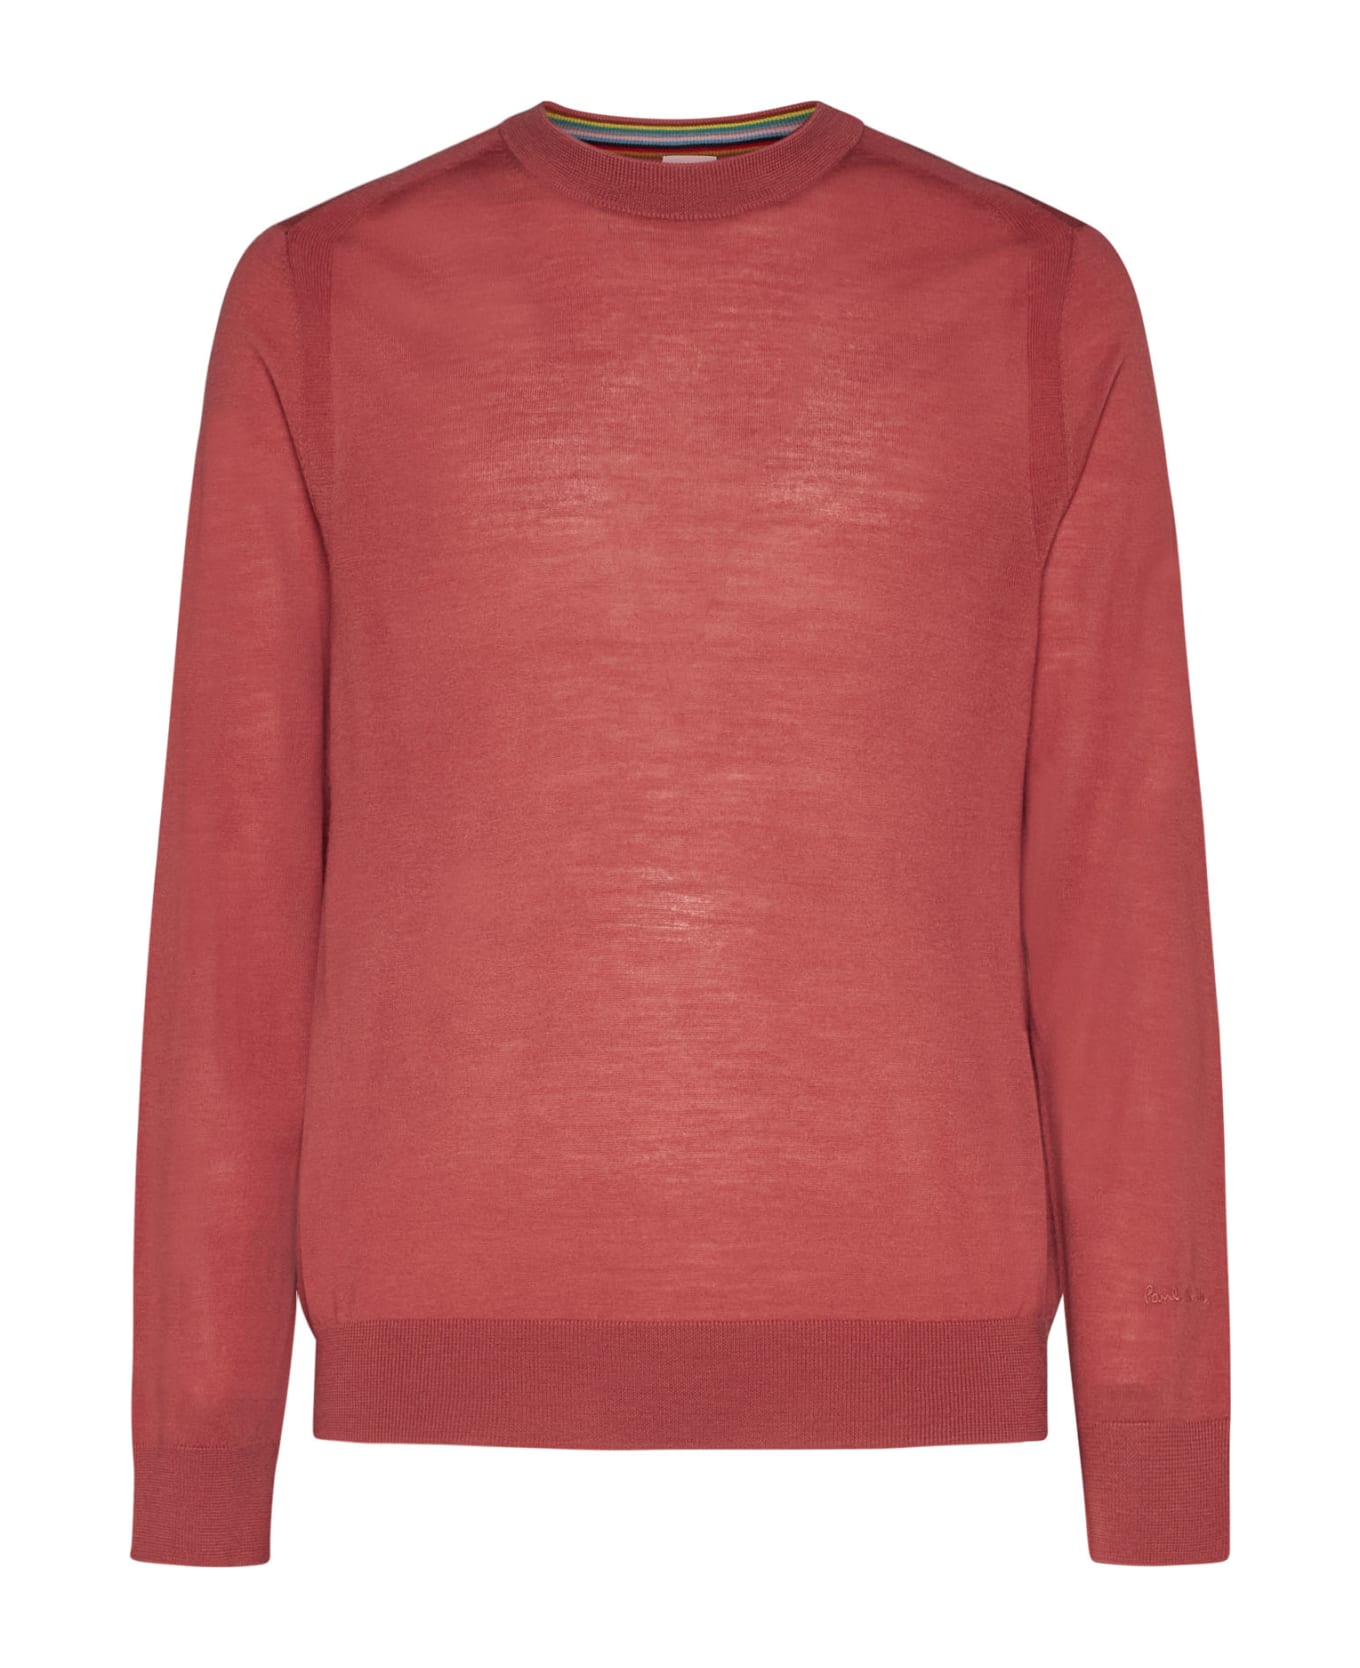 Paul Smith Sweater - Coral